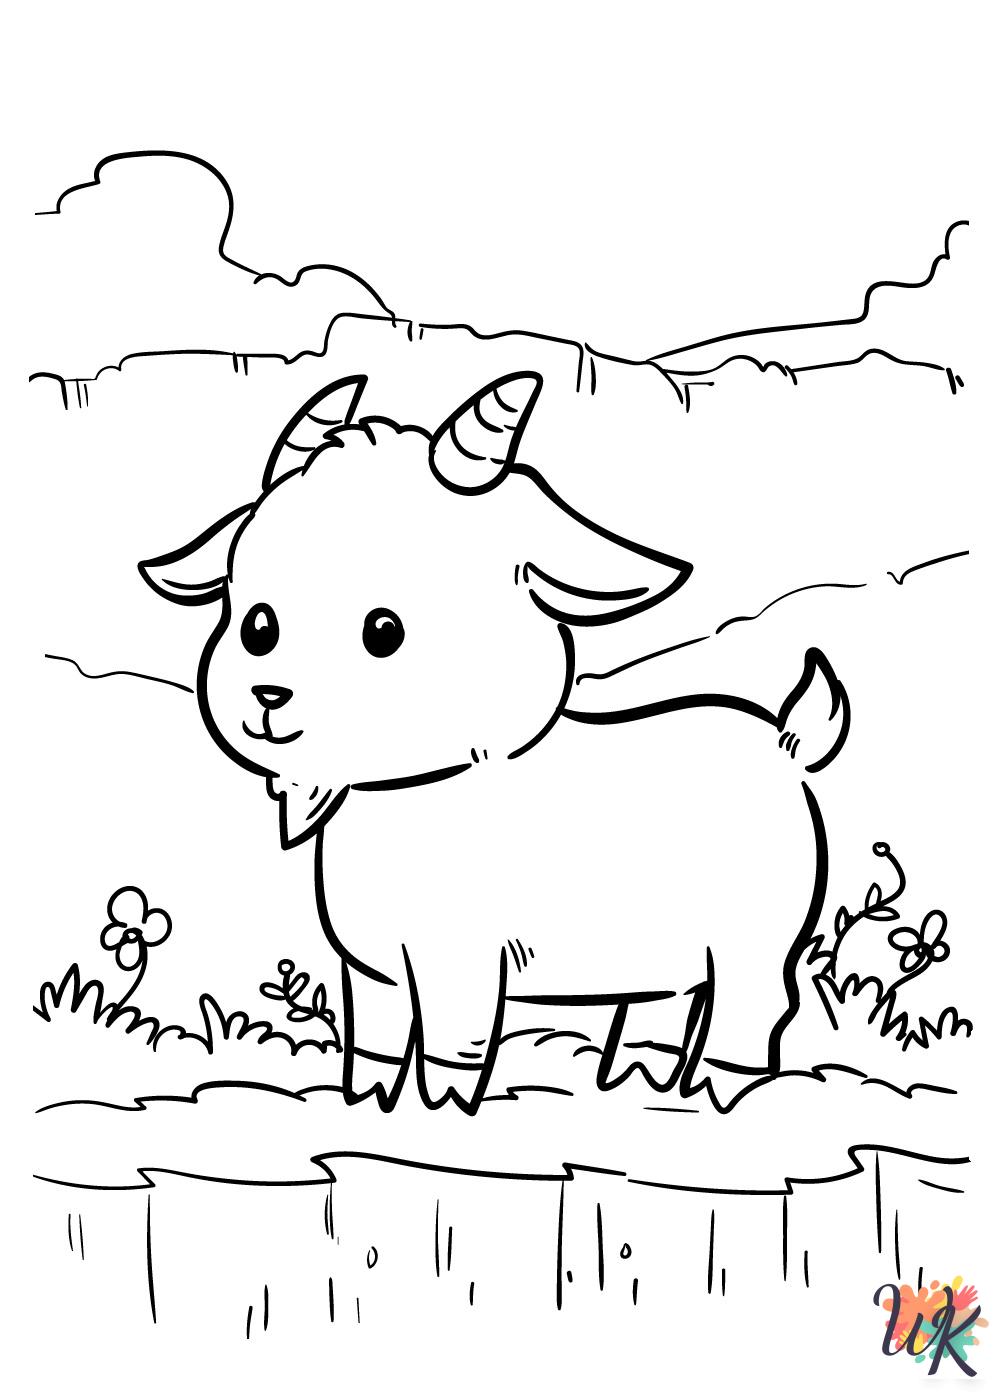 printable Cute Animals coloring pages for adults